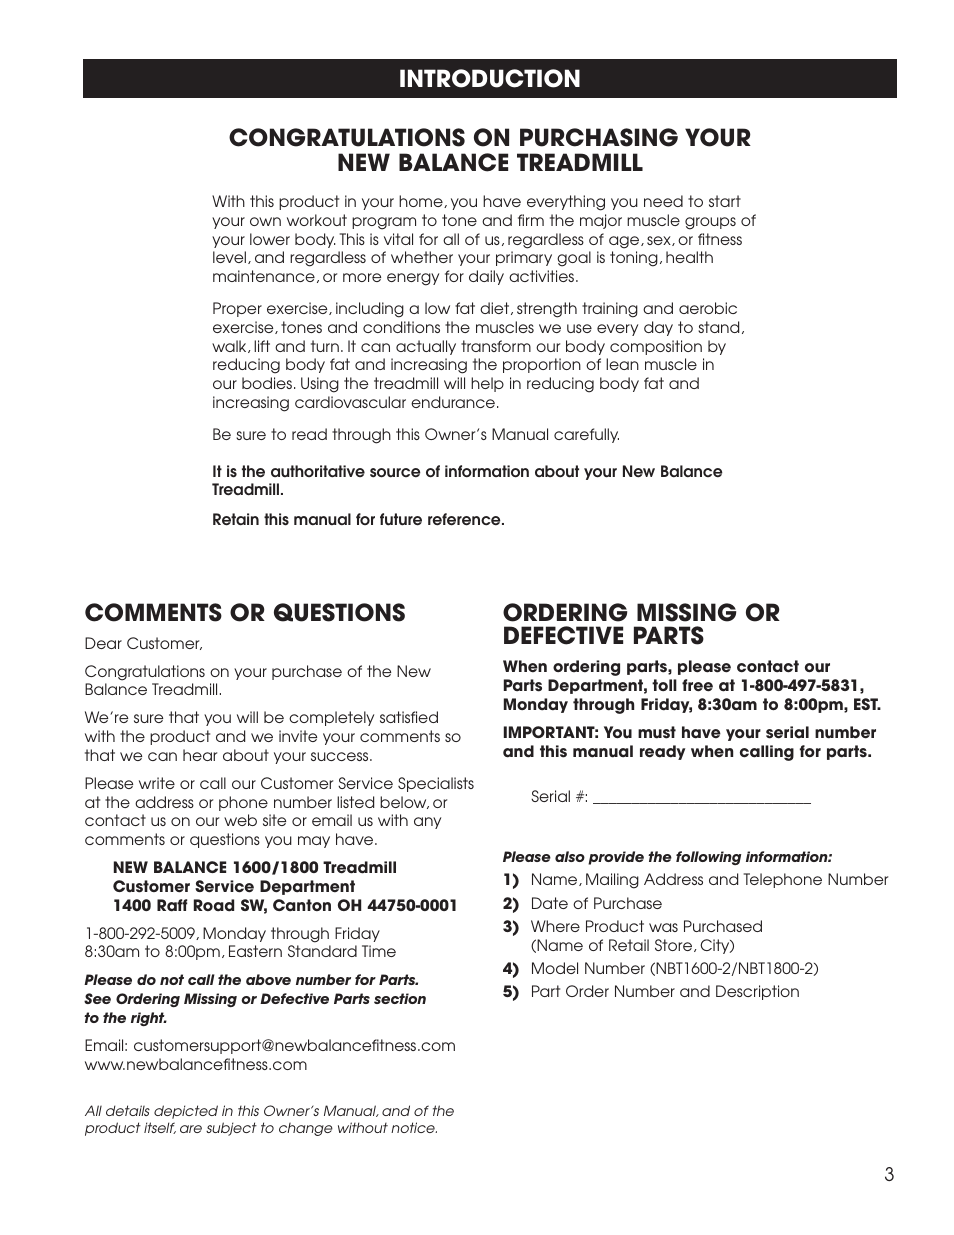 Ordering missing or defective parts, Comments or questions | New Balance  1800 User Manual | Page 4 / 35